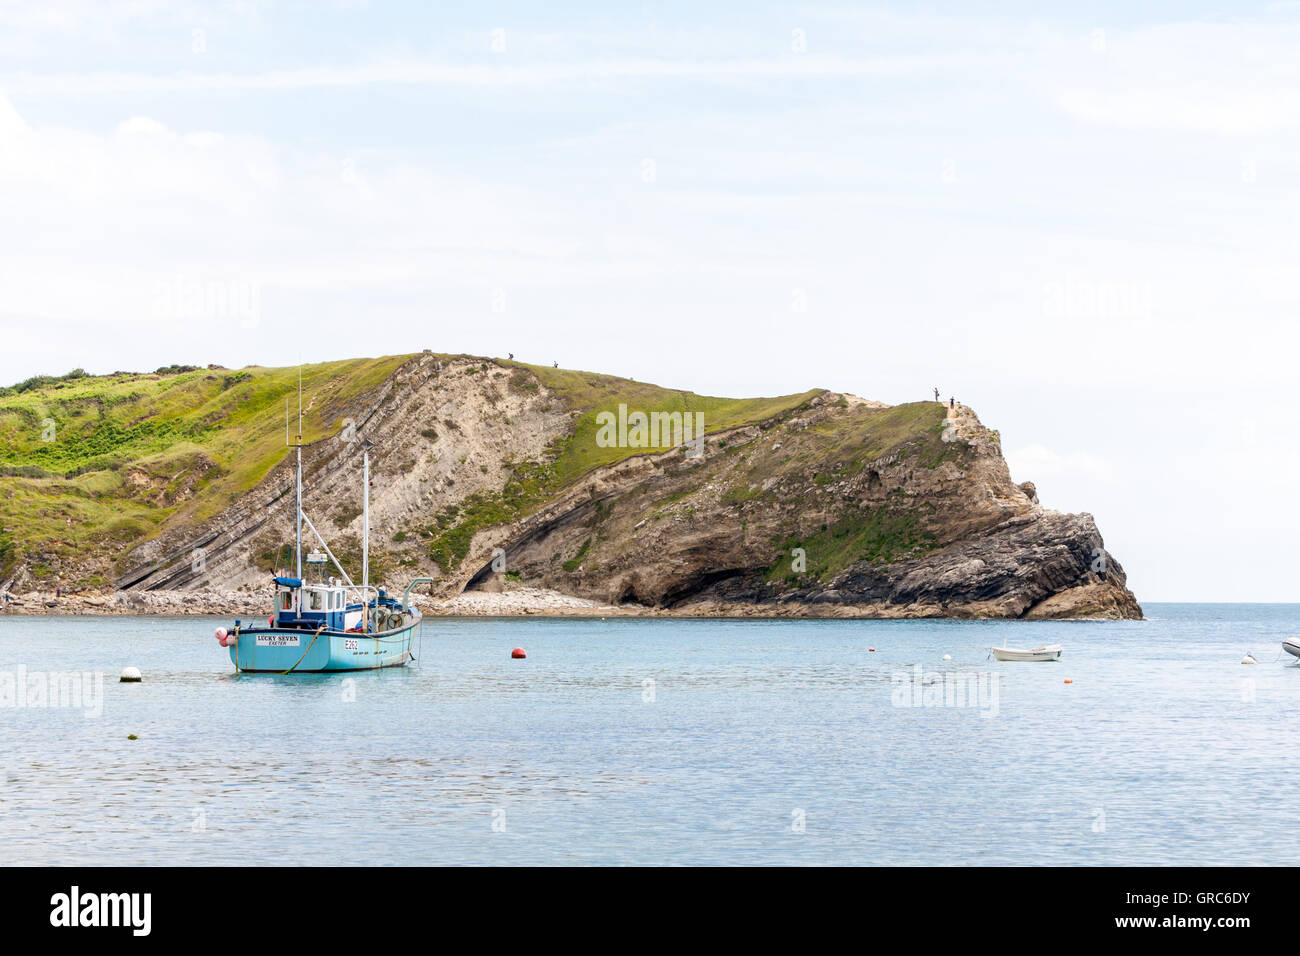 A view of a fishing boat at Lulworth Cove, Dorset, UK Stock Photo